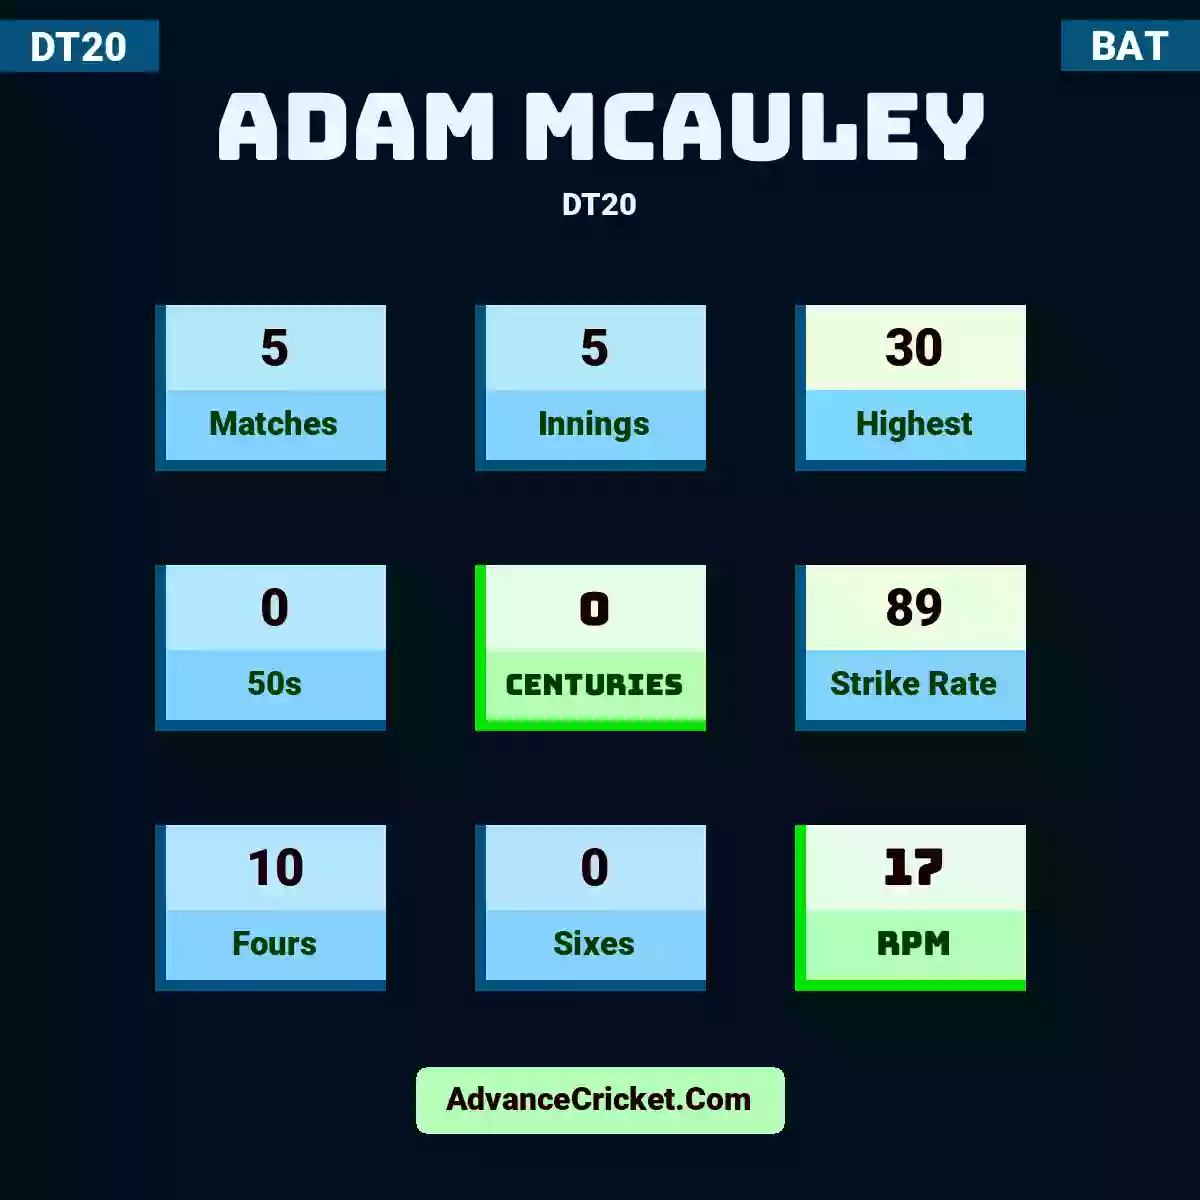 Adam McAuley DT20 , Adam McAuley played 5 matches, scored 30 runs as highest, 0 half-centuries, and 0 centuries, with a strike rate of 89. A.McAuley hit 10 fours and 0 sixes, with an RPM of 17.